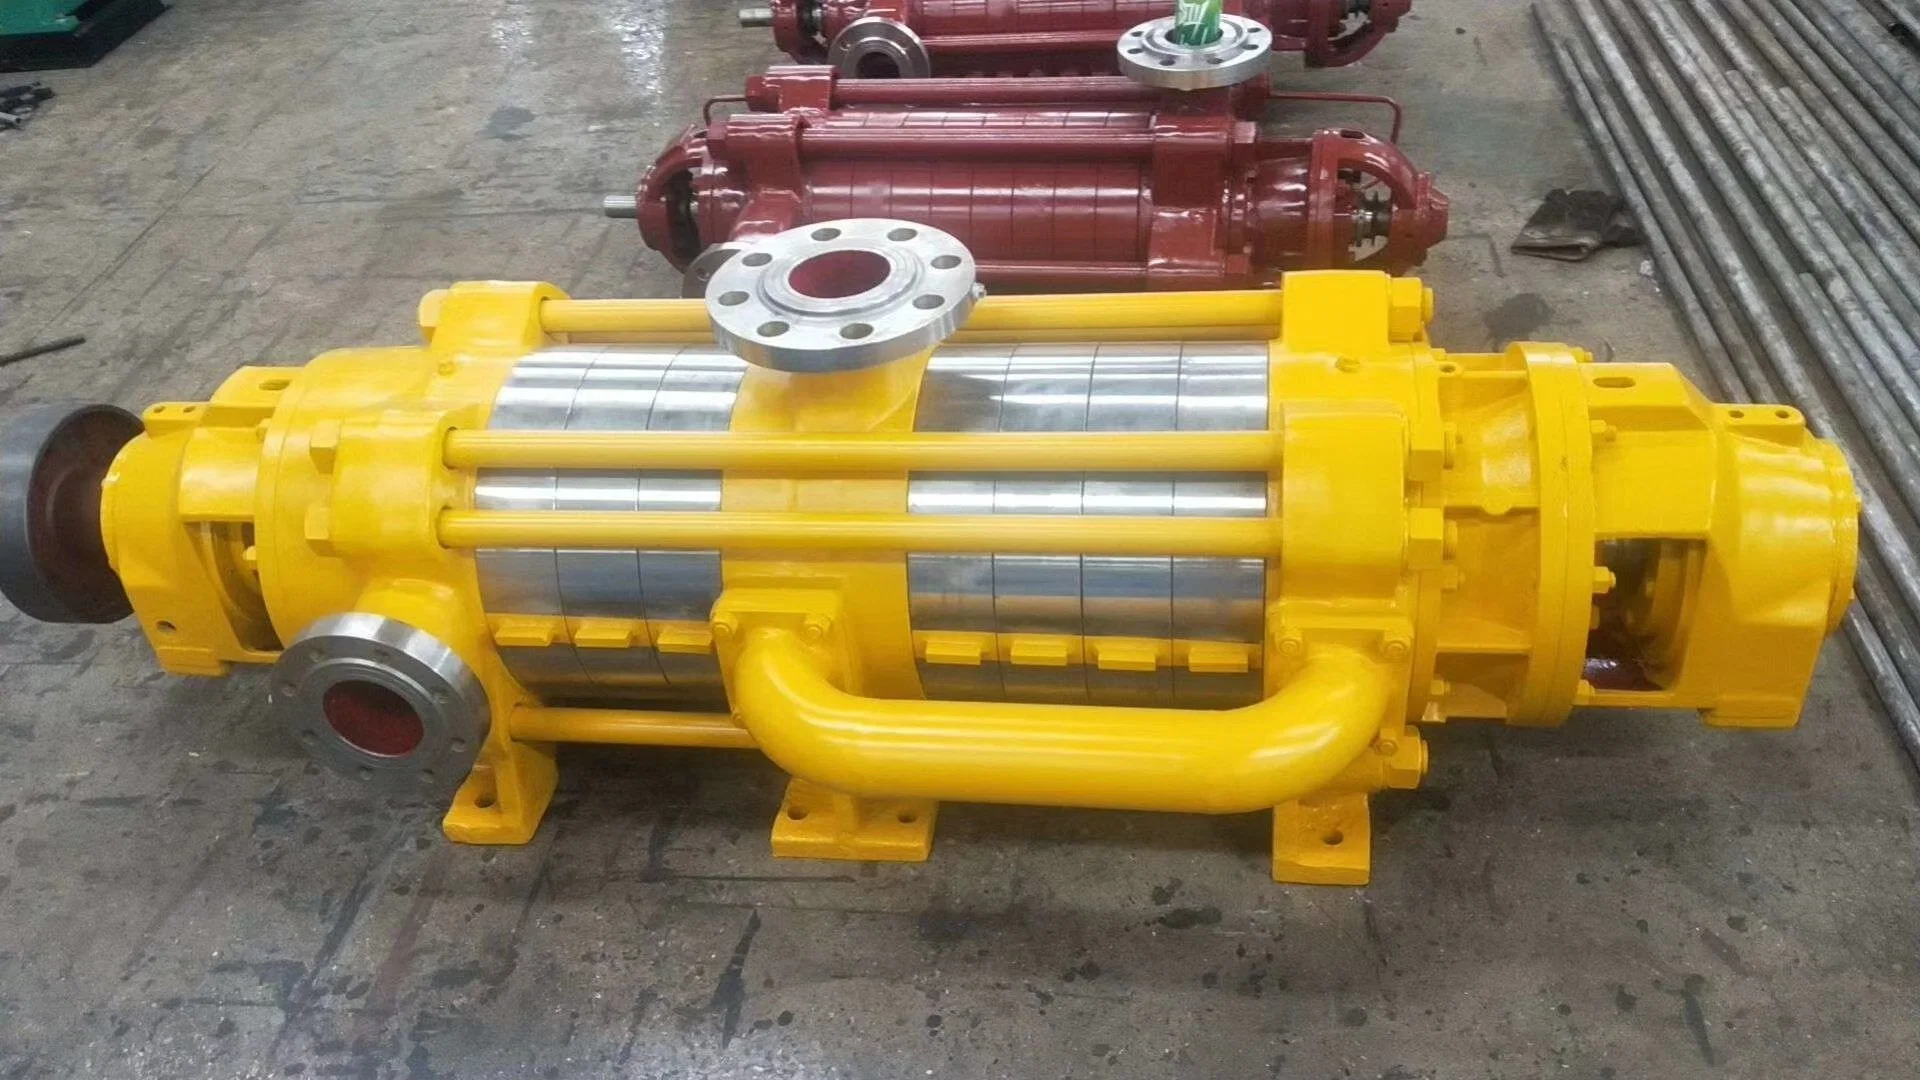 Supply Electric Horizontal Multistage/Multi-Stage High Pressure Centrifugal Mining Water Pump Self-Priming Pump Boiler Beed Pump Booster Pump